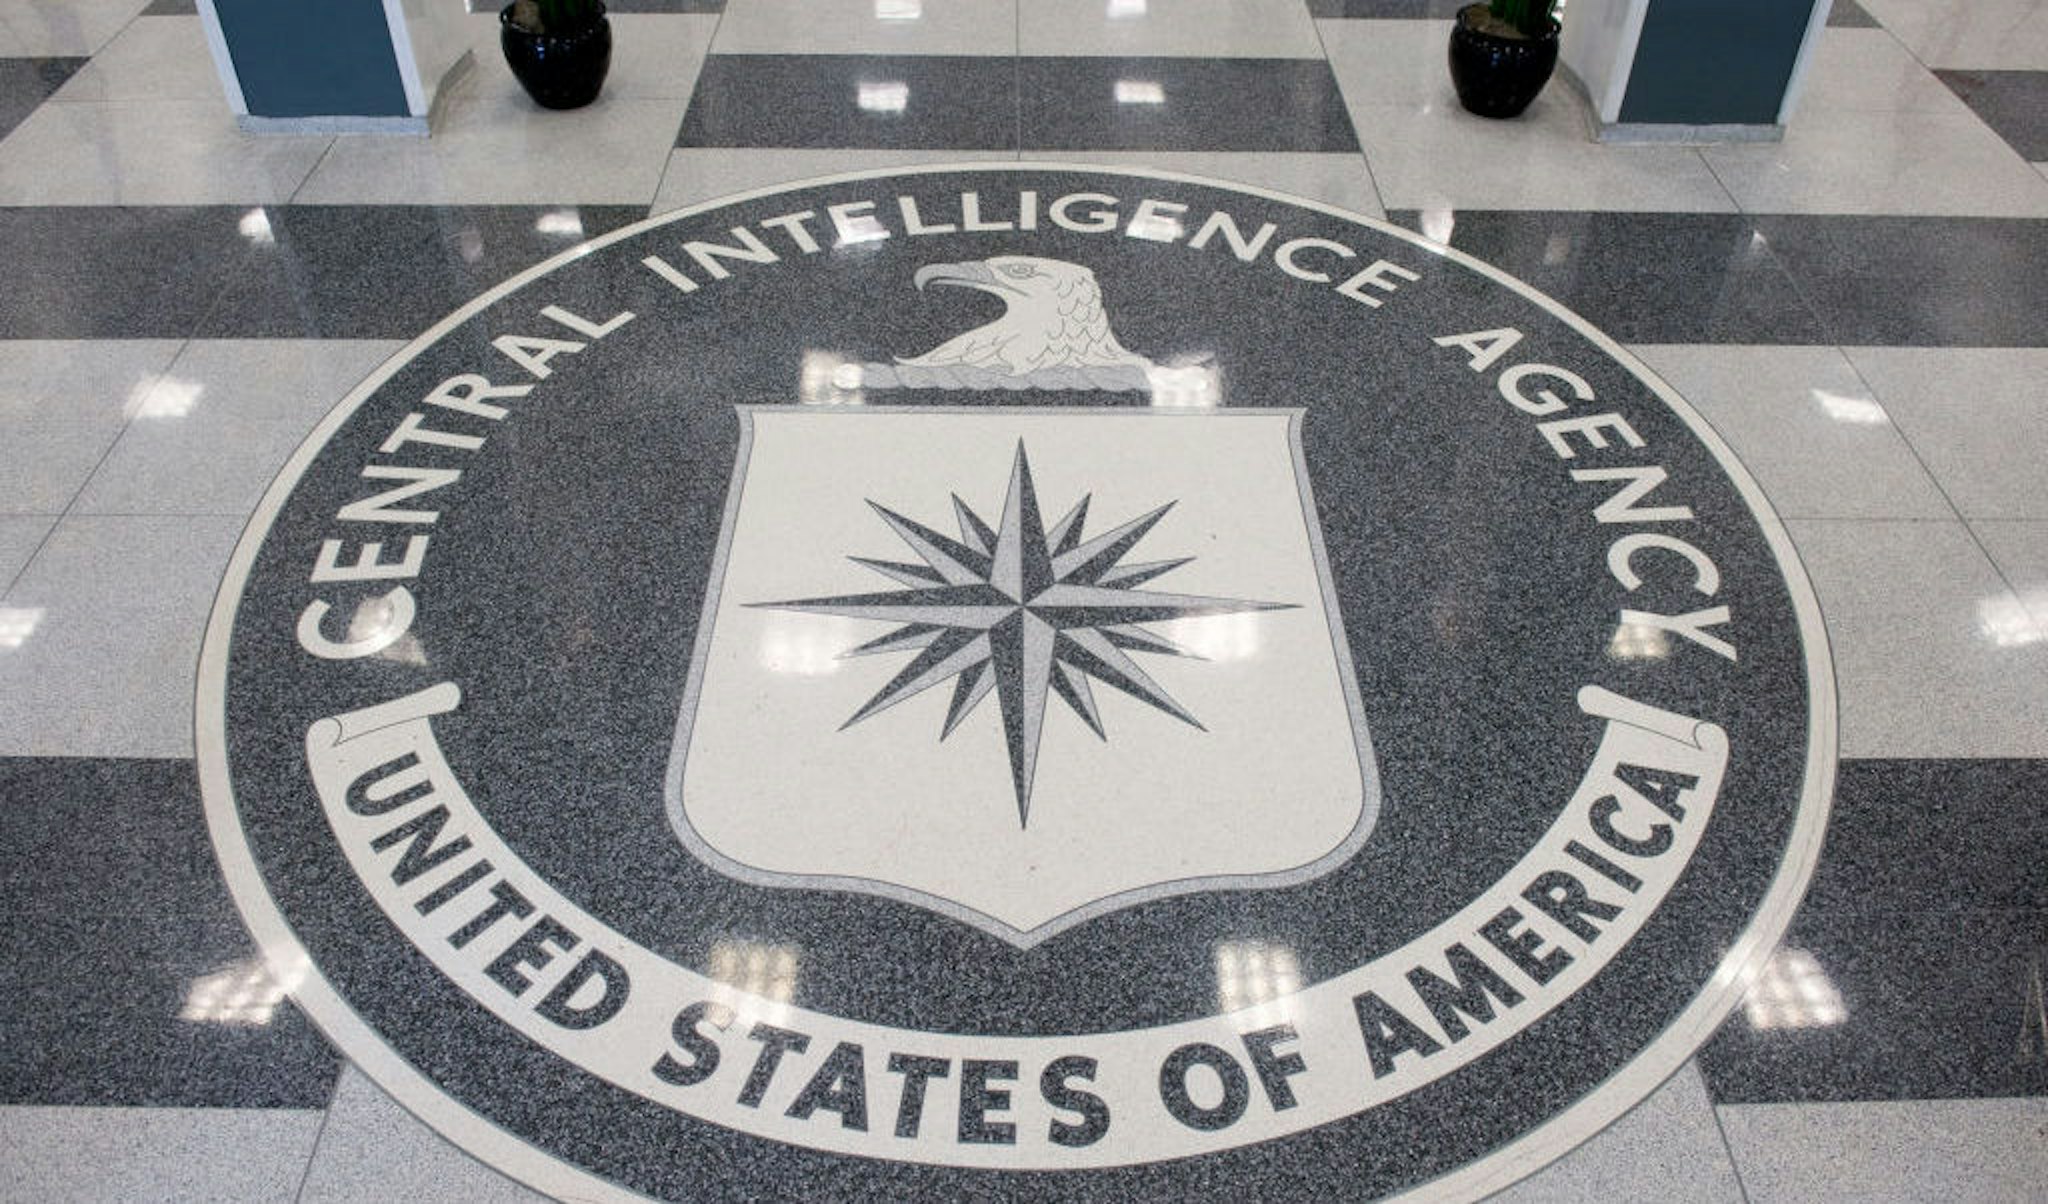 The Central Intelligence Agency (CIA) seal is displayed in the lobby of CIA Headquarters in Langley, Virginia, on August 14, 2008. (Photo by SAUL LOEB/AFP via Getty Images)